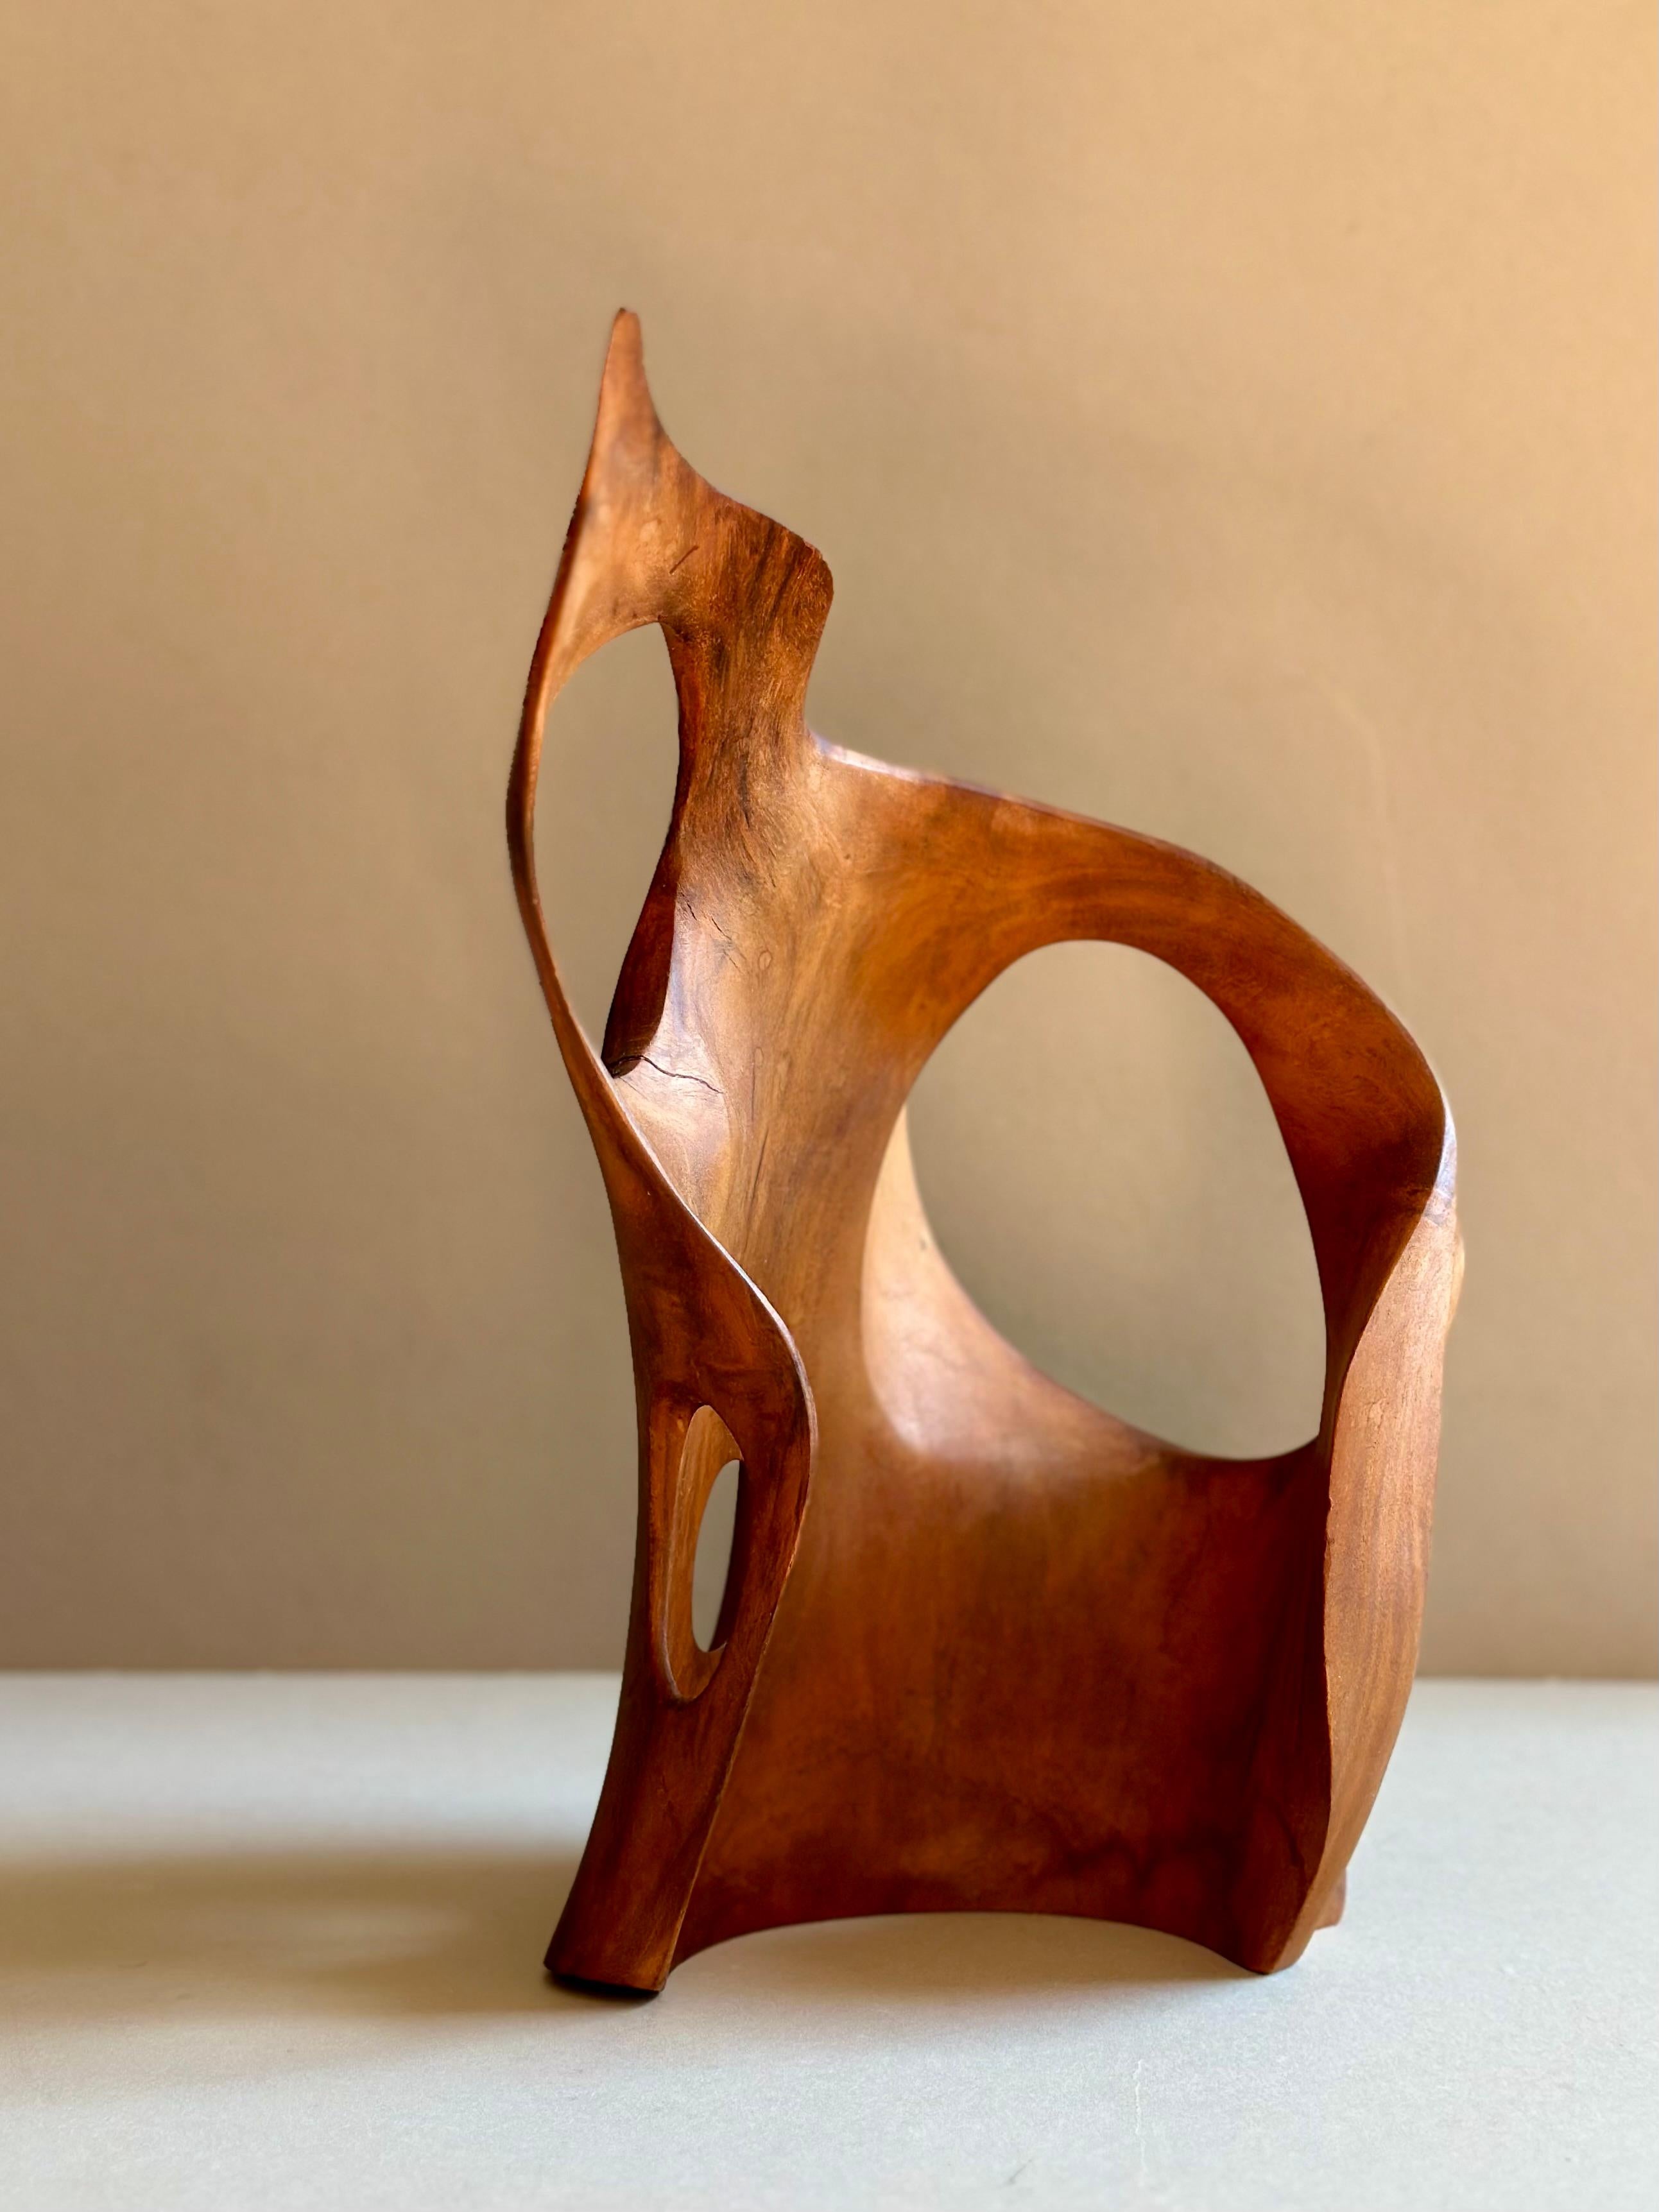 A beguiling, solid wood, tabletop sculpture with subcircular cutouts and resembling a wave or flame. Looks different at each angle and casts dramatic, sensual shadows, perfect for an area with lots of sunlight. Likely walnut. American, circa 1970.